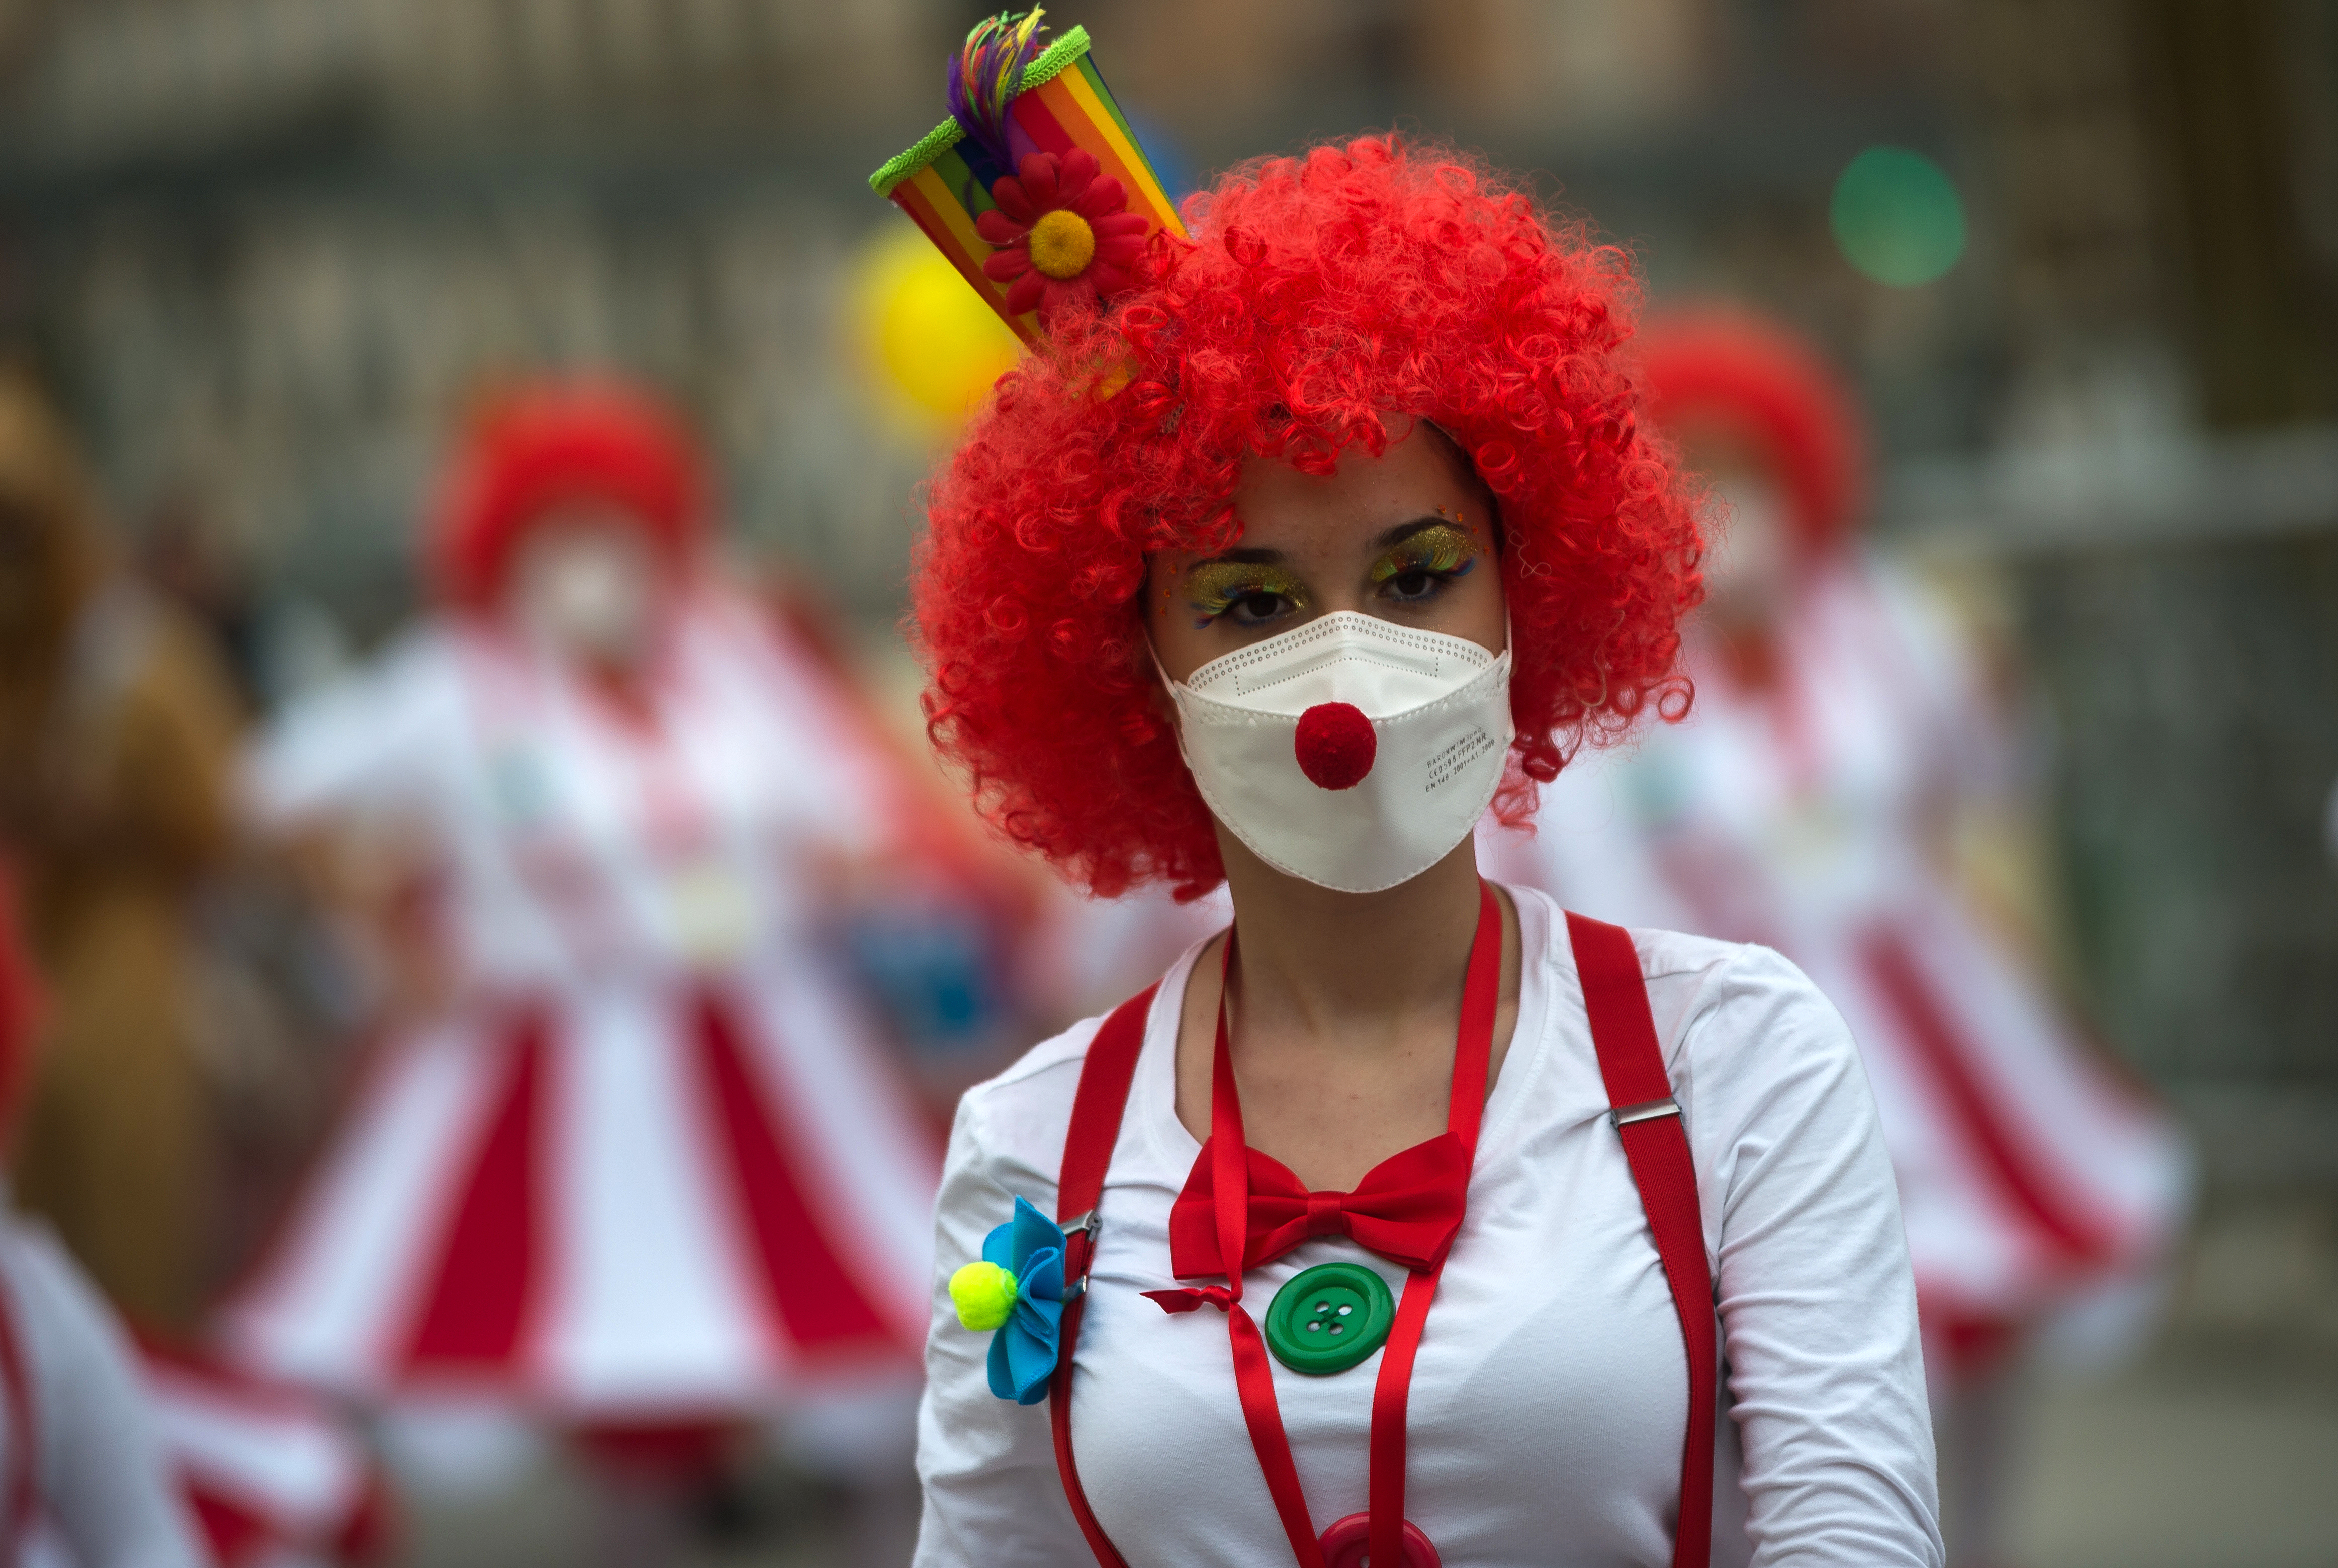 A woman dressed as a clown. | Source: Getty Images